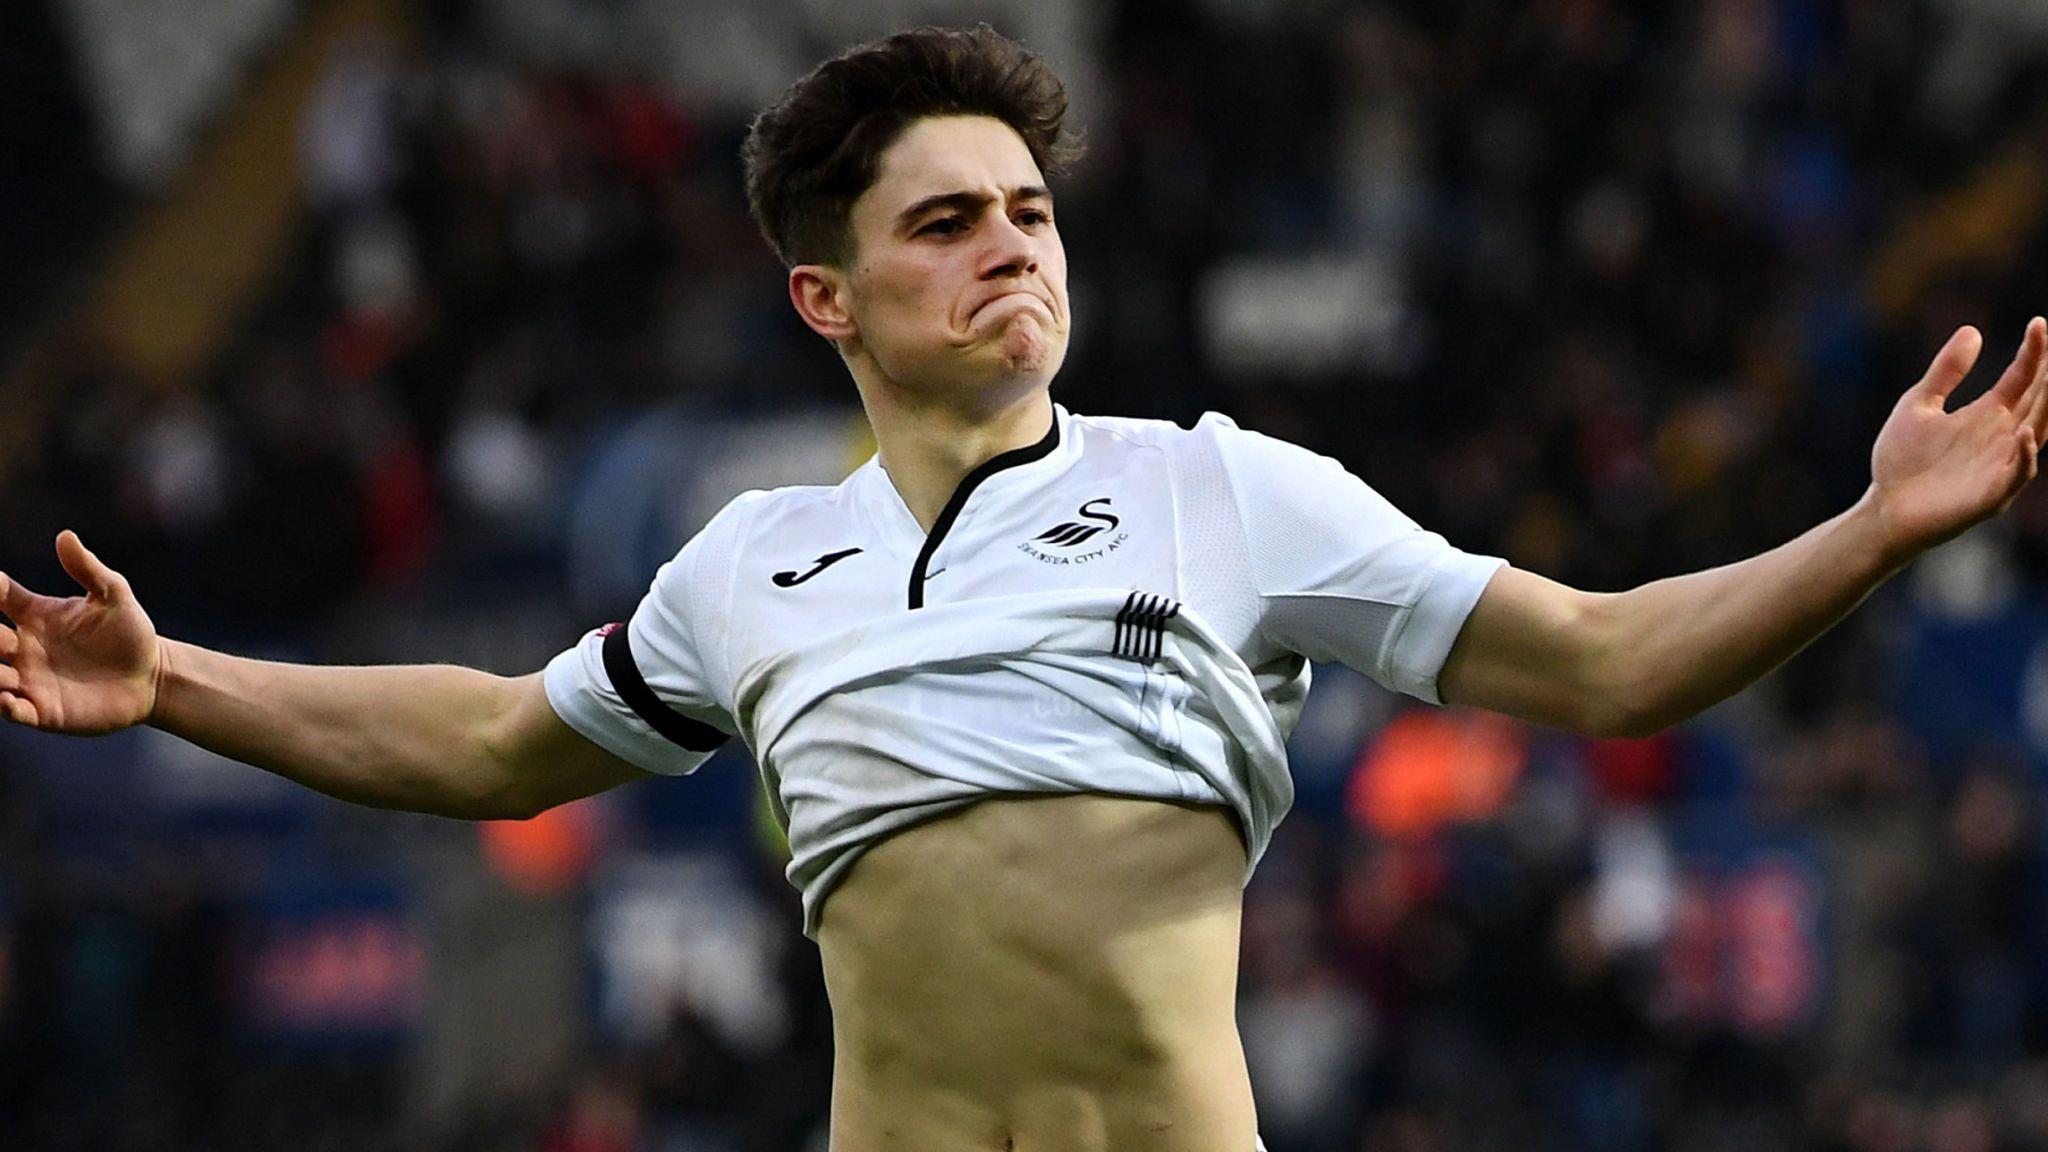 Wales youngster Daniel James reveals Swansea contract talks are